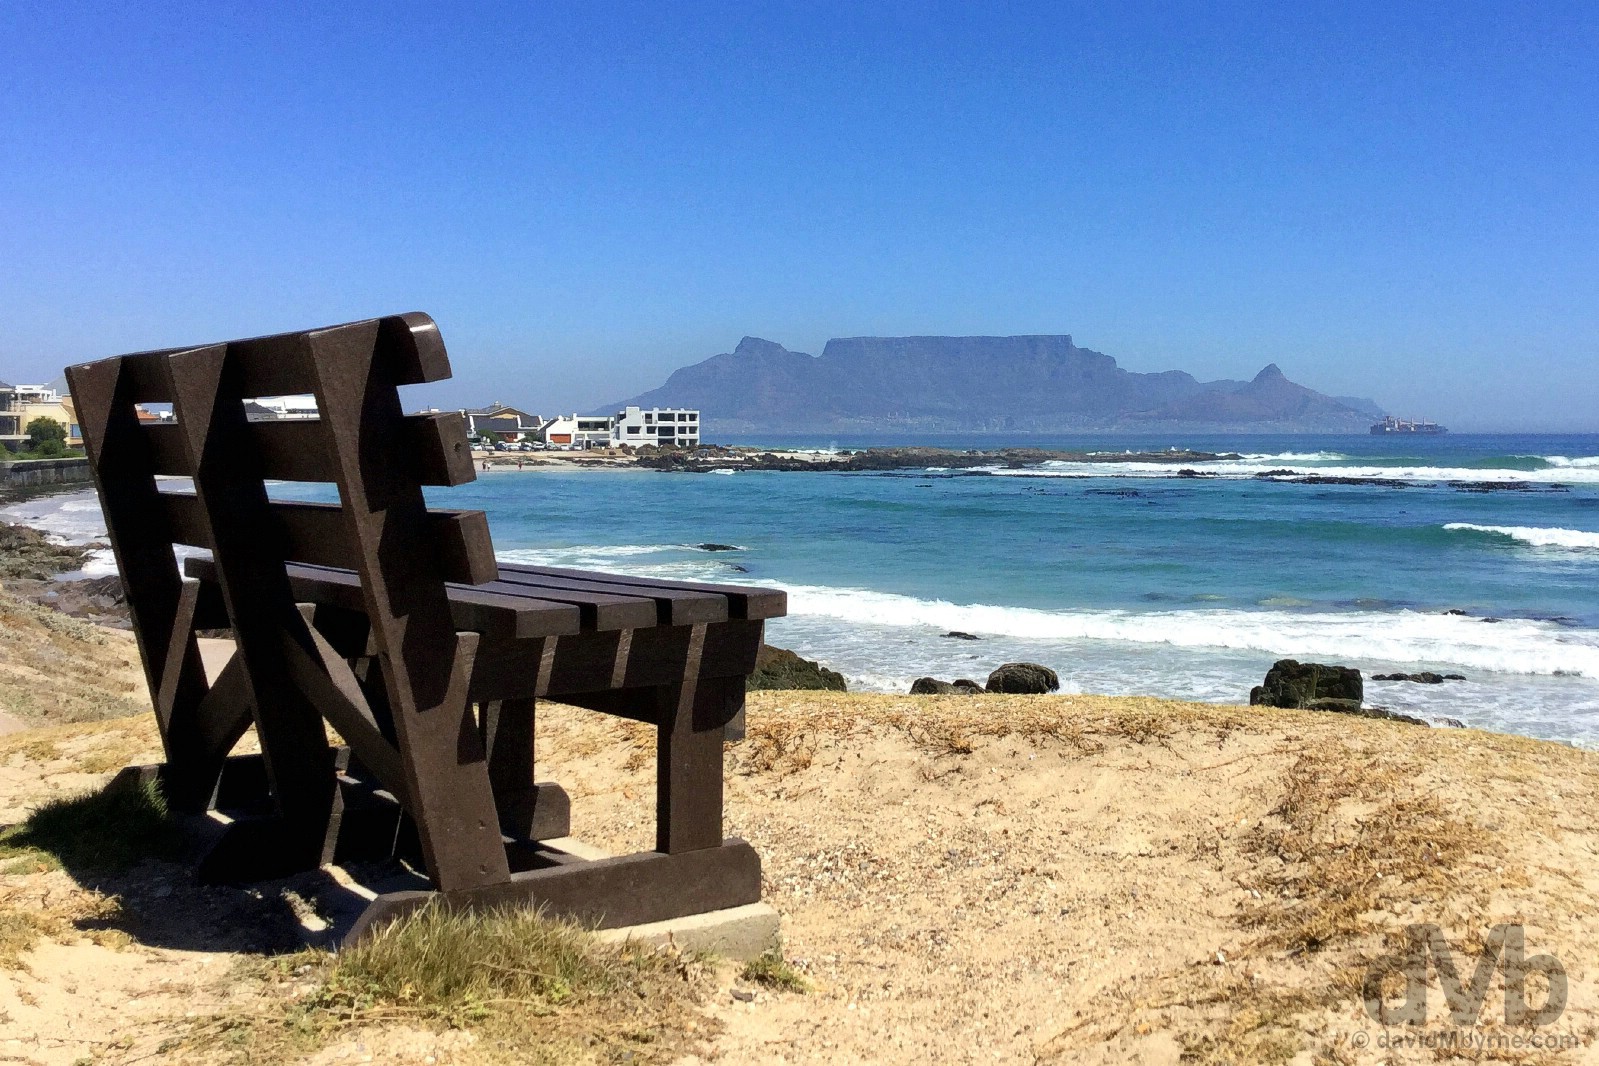 Cape Town & Table Mountain as seen from across Table Bay in Bloubergstrand. Western Cape, South Africa. February 15, 2017.